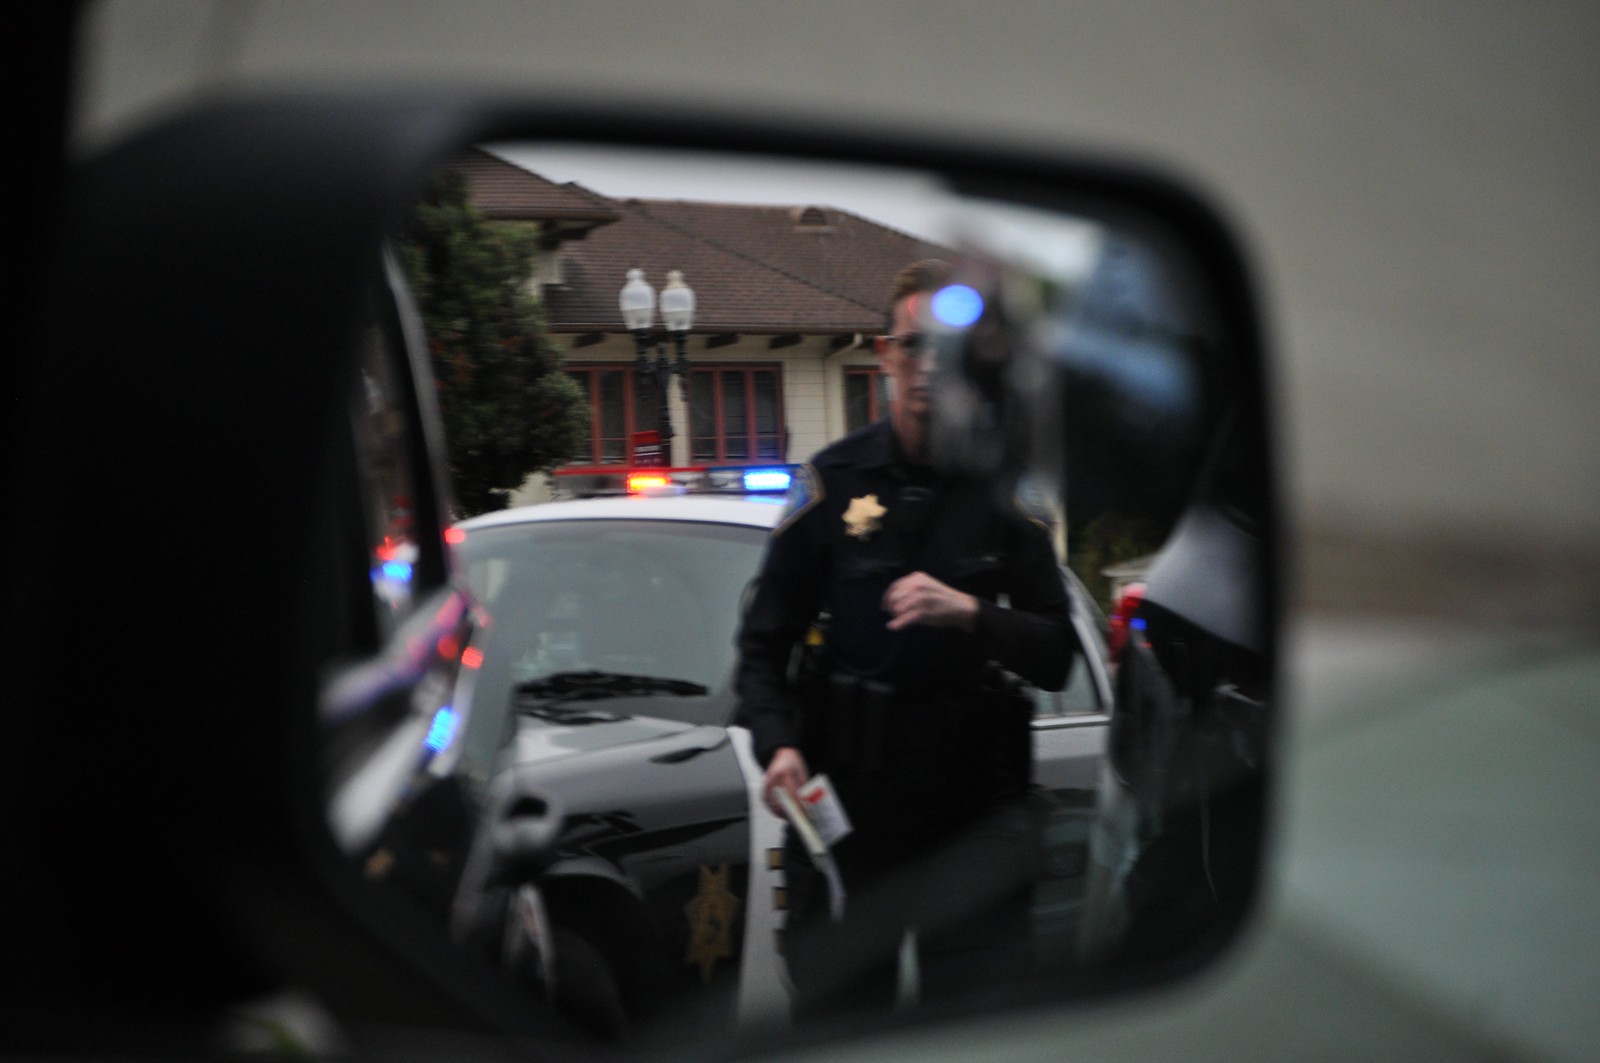 Police officer in side view mirror